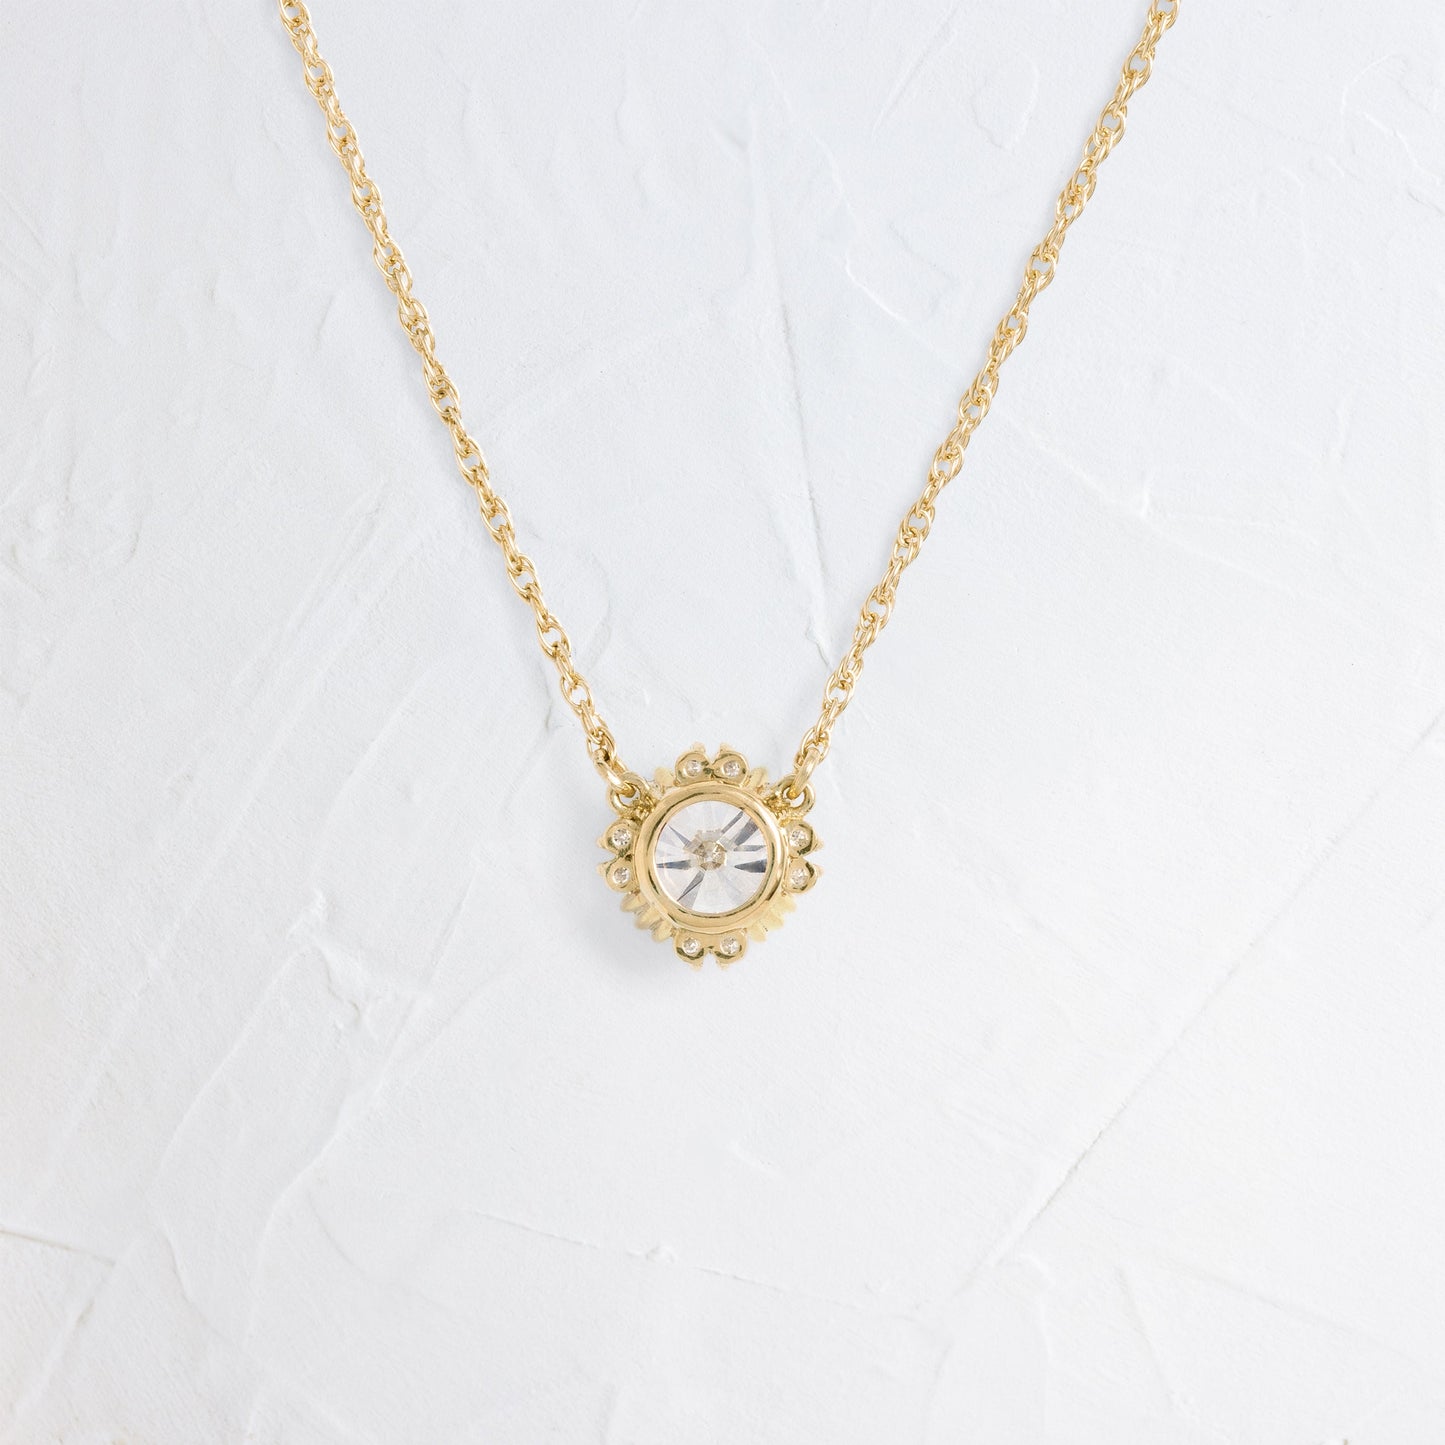 Threaded Necklace with Halo, 0.7ct. Champagne Diamond - Edition 2